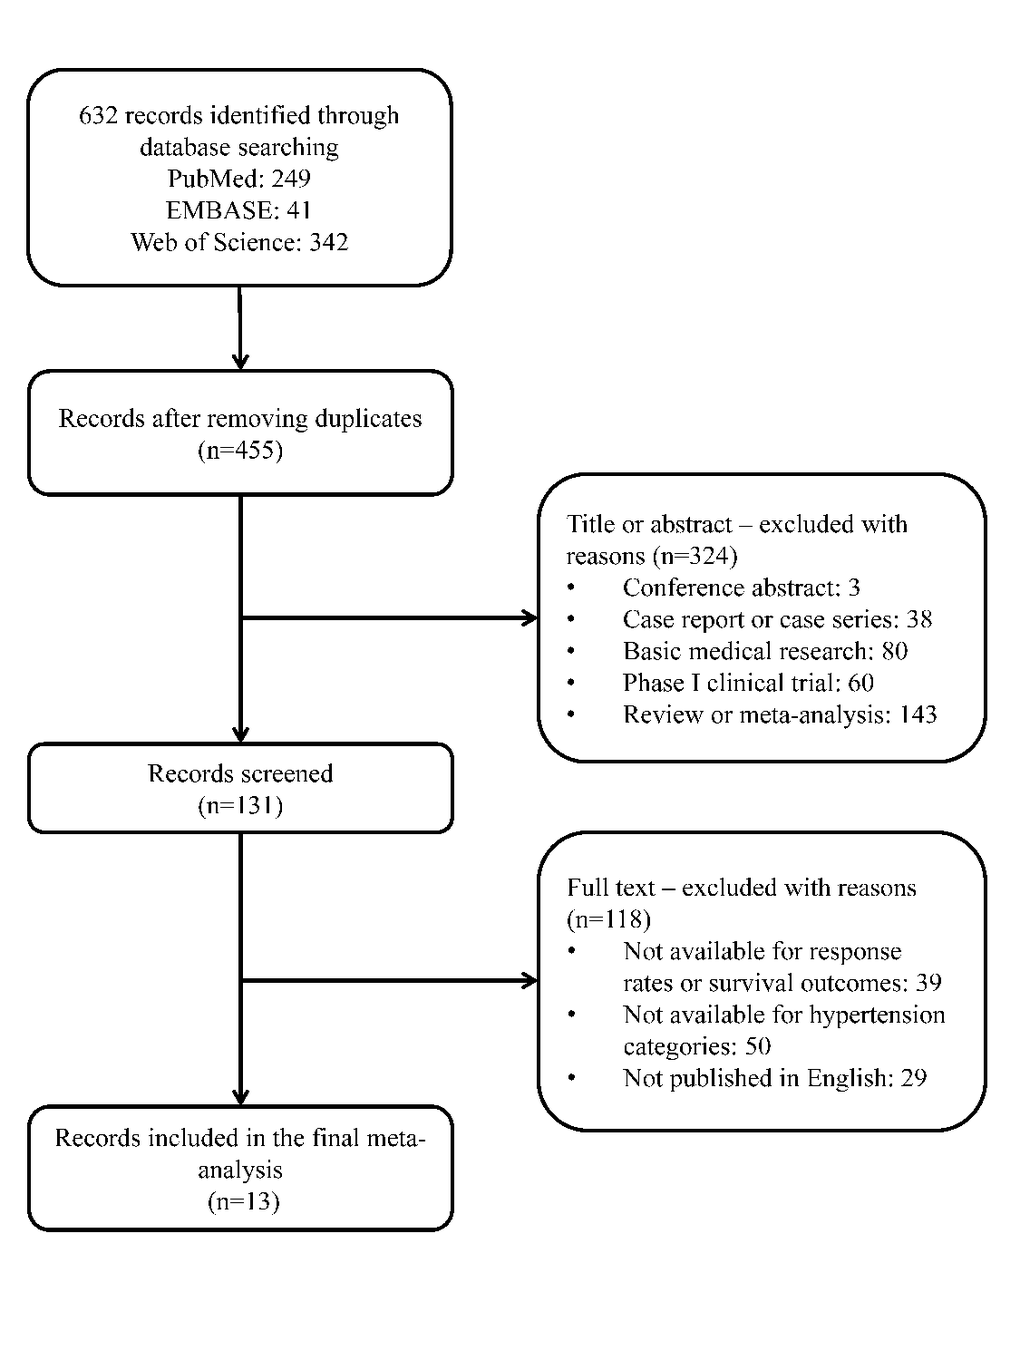 The flowchart for article selection in this meta-analysis.